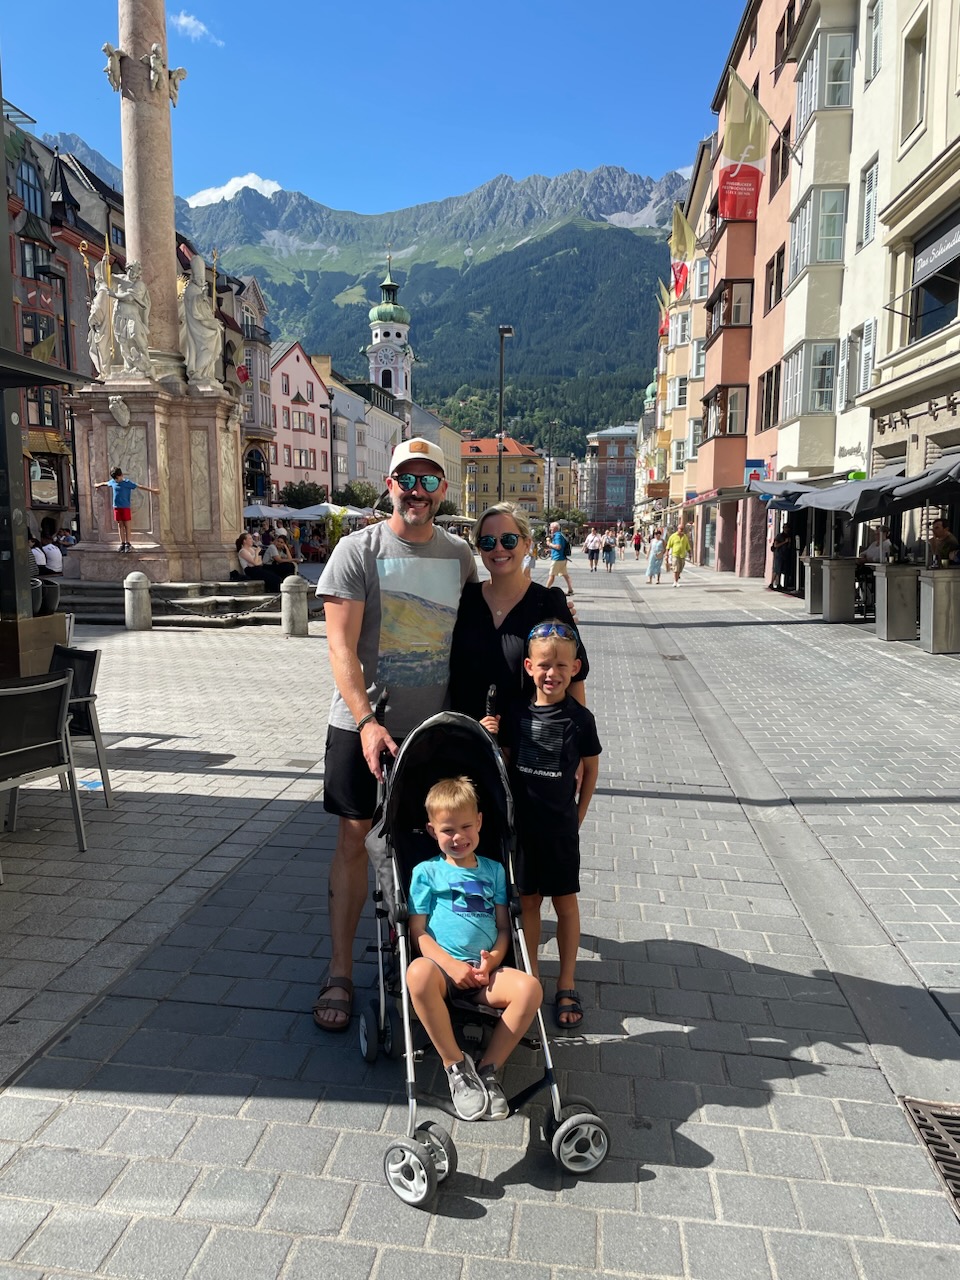 Family time in Germany! Mark Pritchard - State Farm Insurance Agent Atlanta (404)856-4950